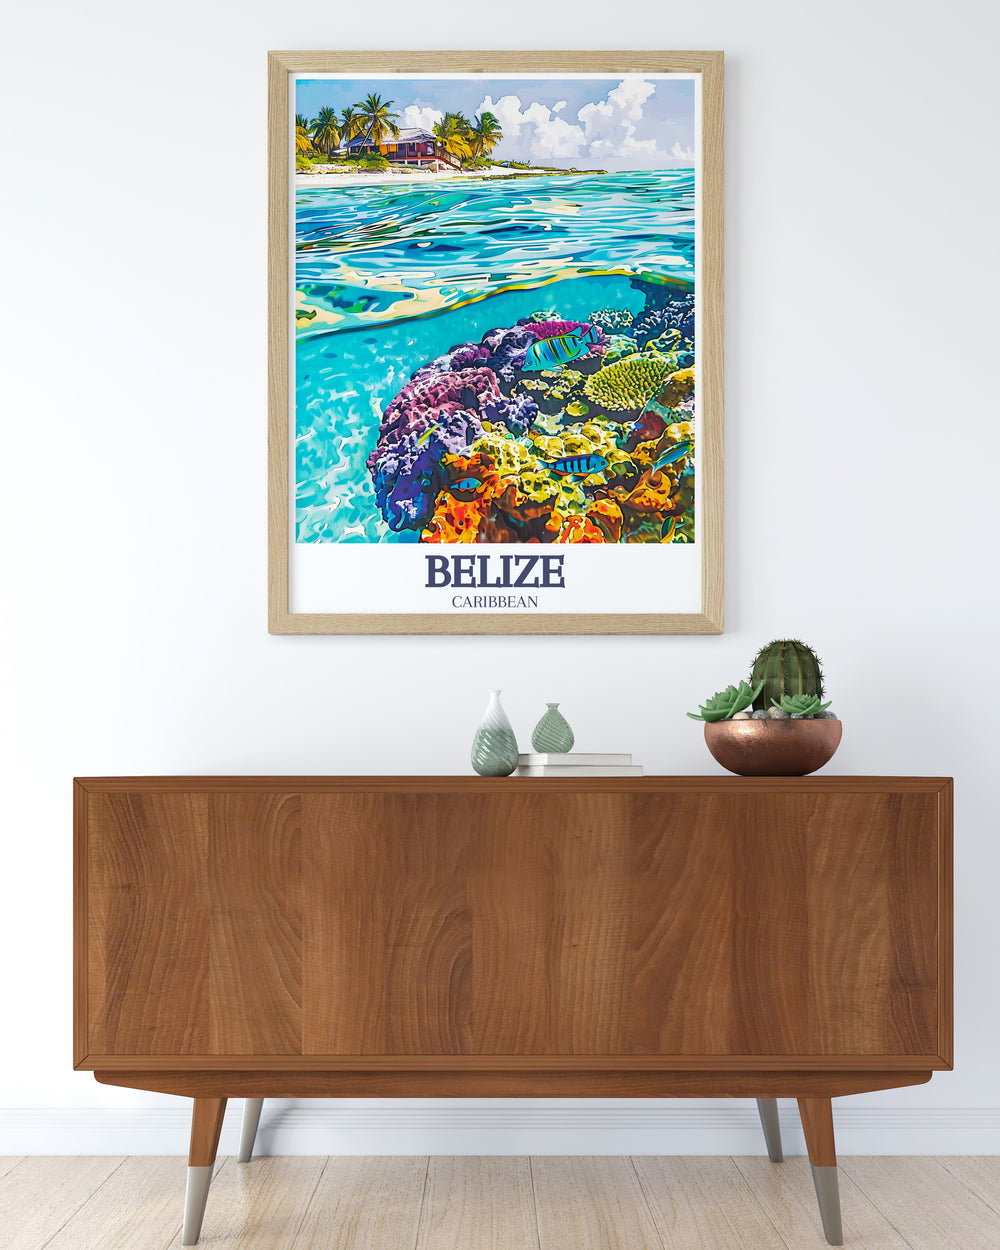 Stunning Belize Barrier Reef Belize Coast wall art capturing the serene beauty of Caribbean marine life vibrant colors and intricate details ideal for transforming any room with a touch of tropical paradise